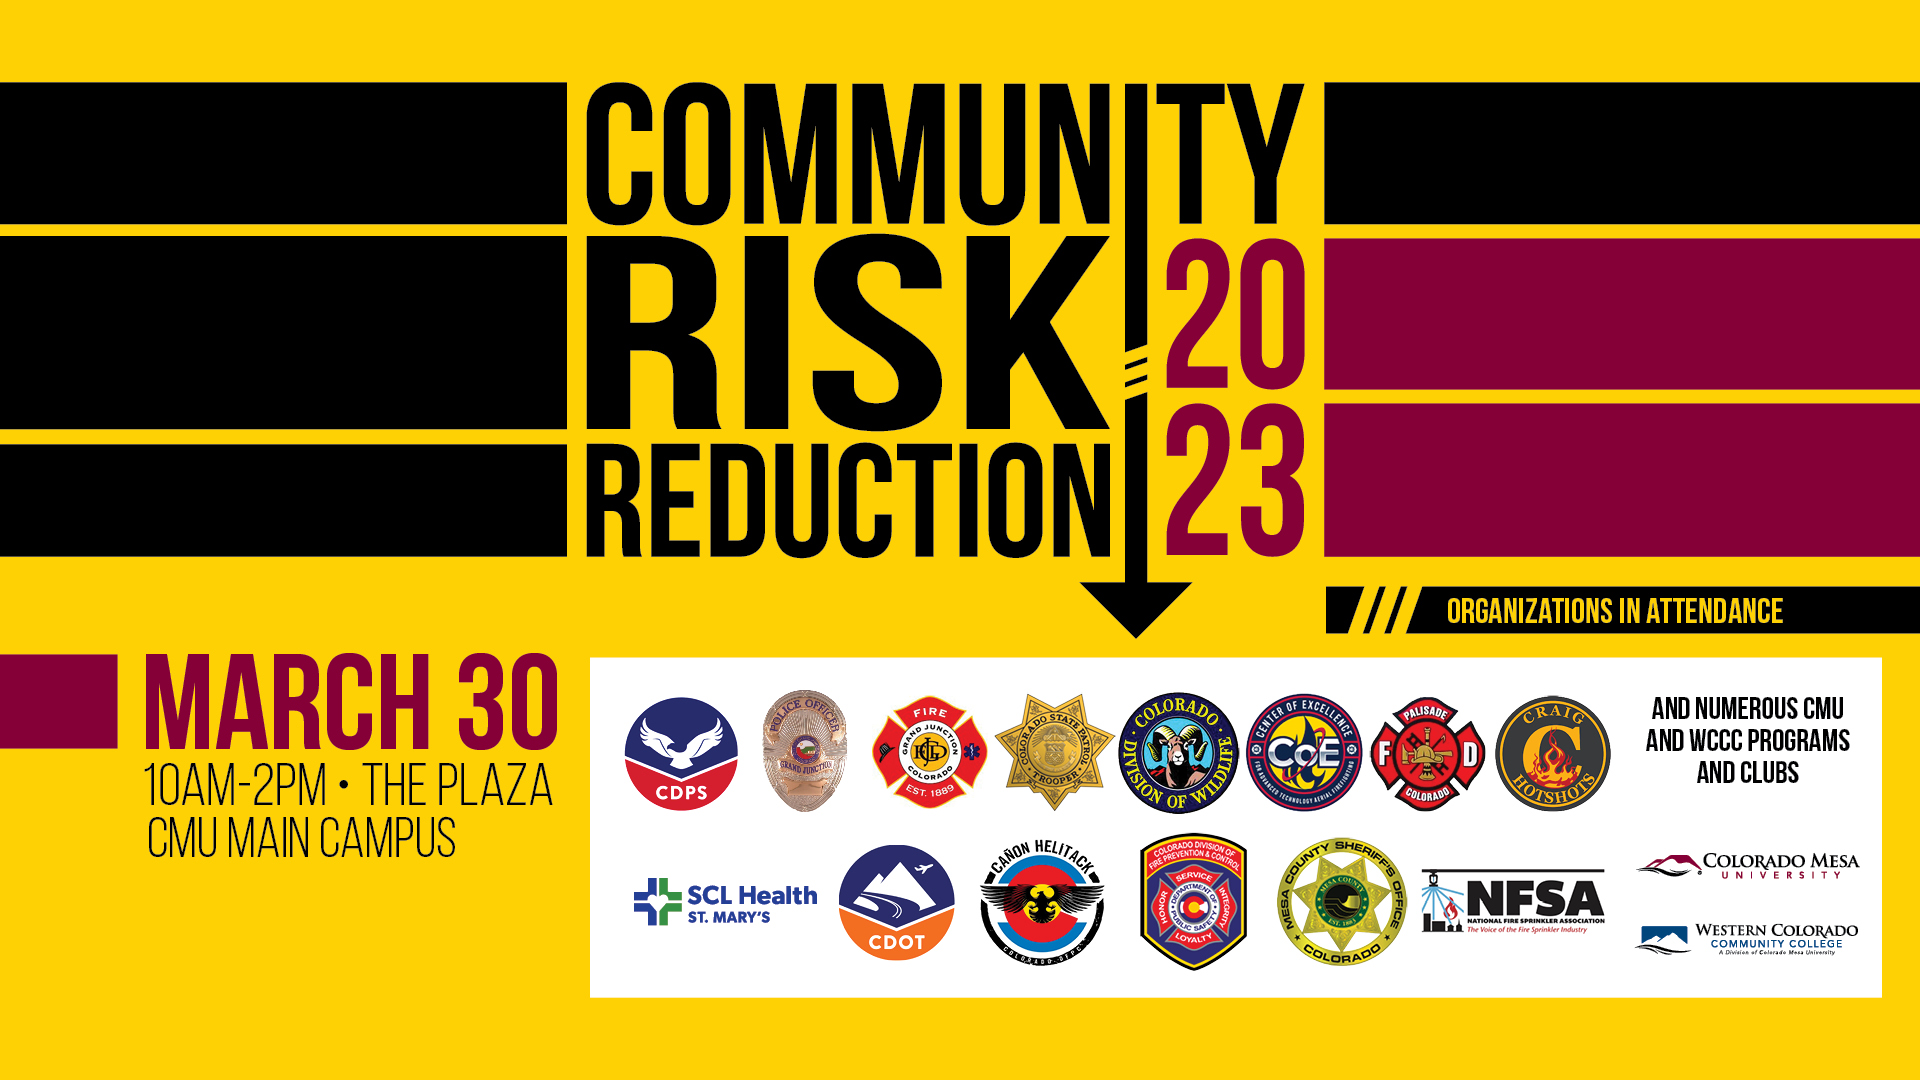 State Fire Agency To Hold Special Event at Colorado Mesa University in Honor of Community Risk Reduction Week 2023